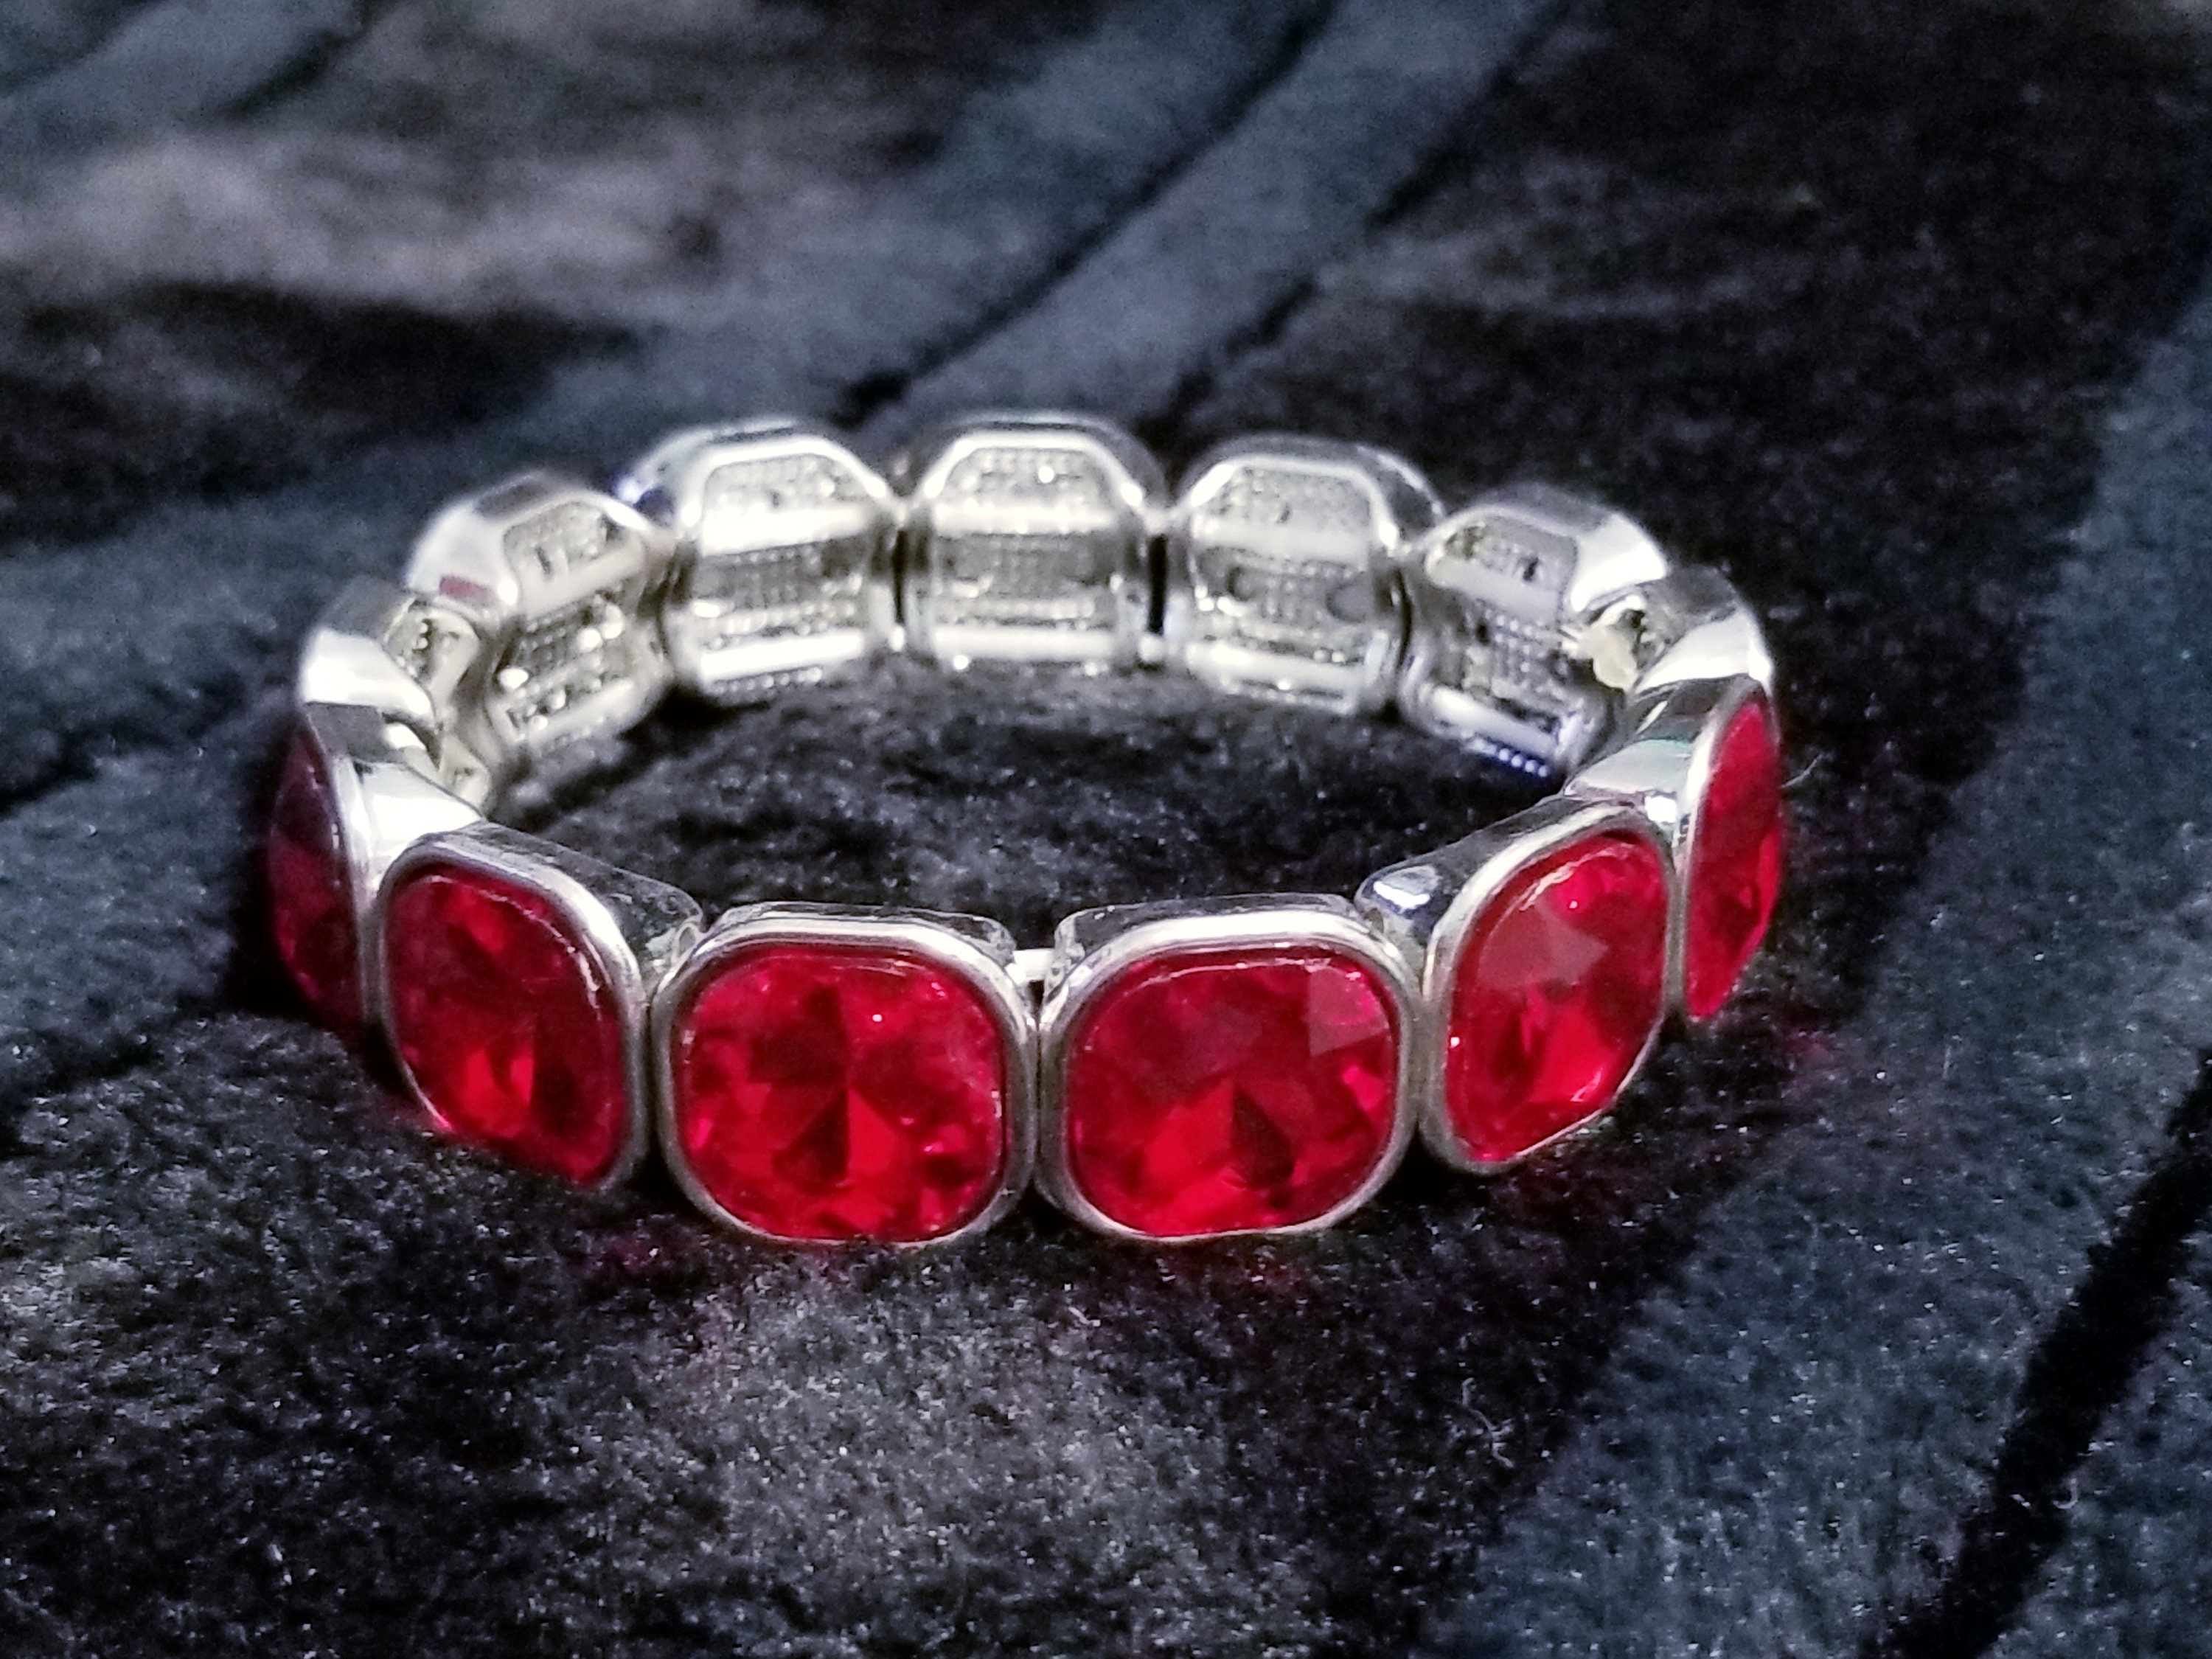 Pageant Prom Jewelry Gift for Her Red Crystal Bracelet Bridal Drag Queen Rhinestone Bracelet Stretch